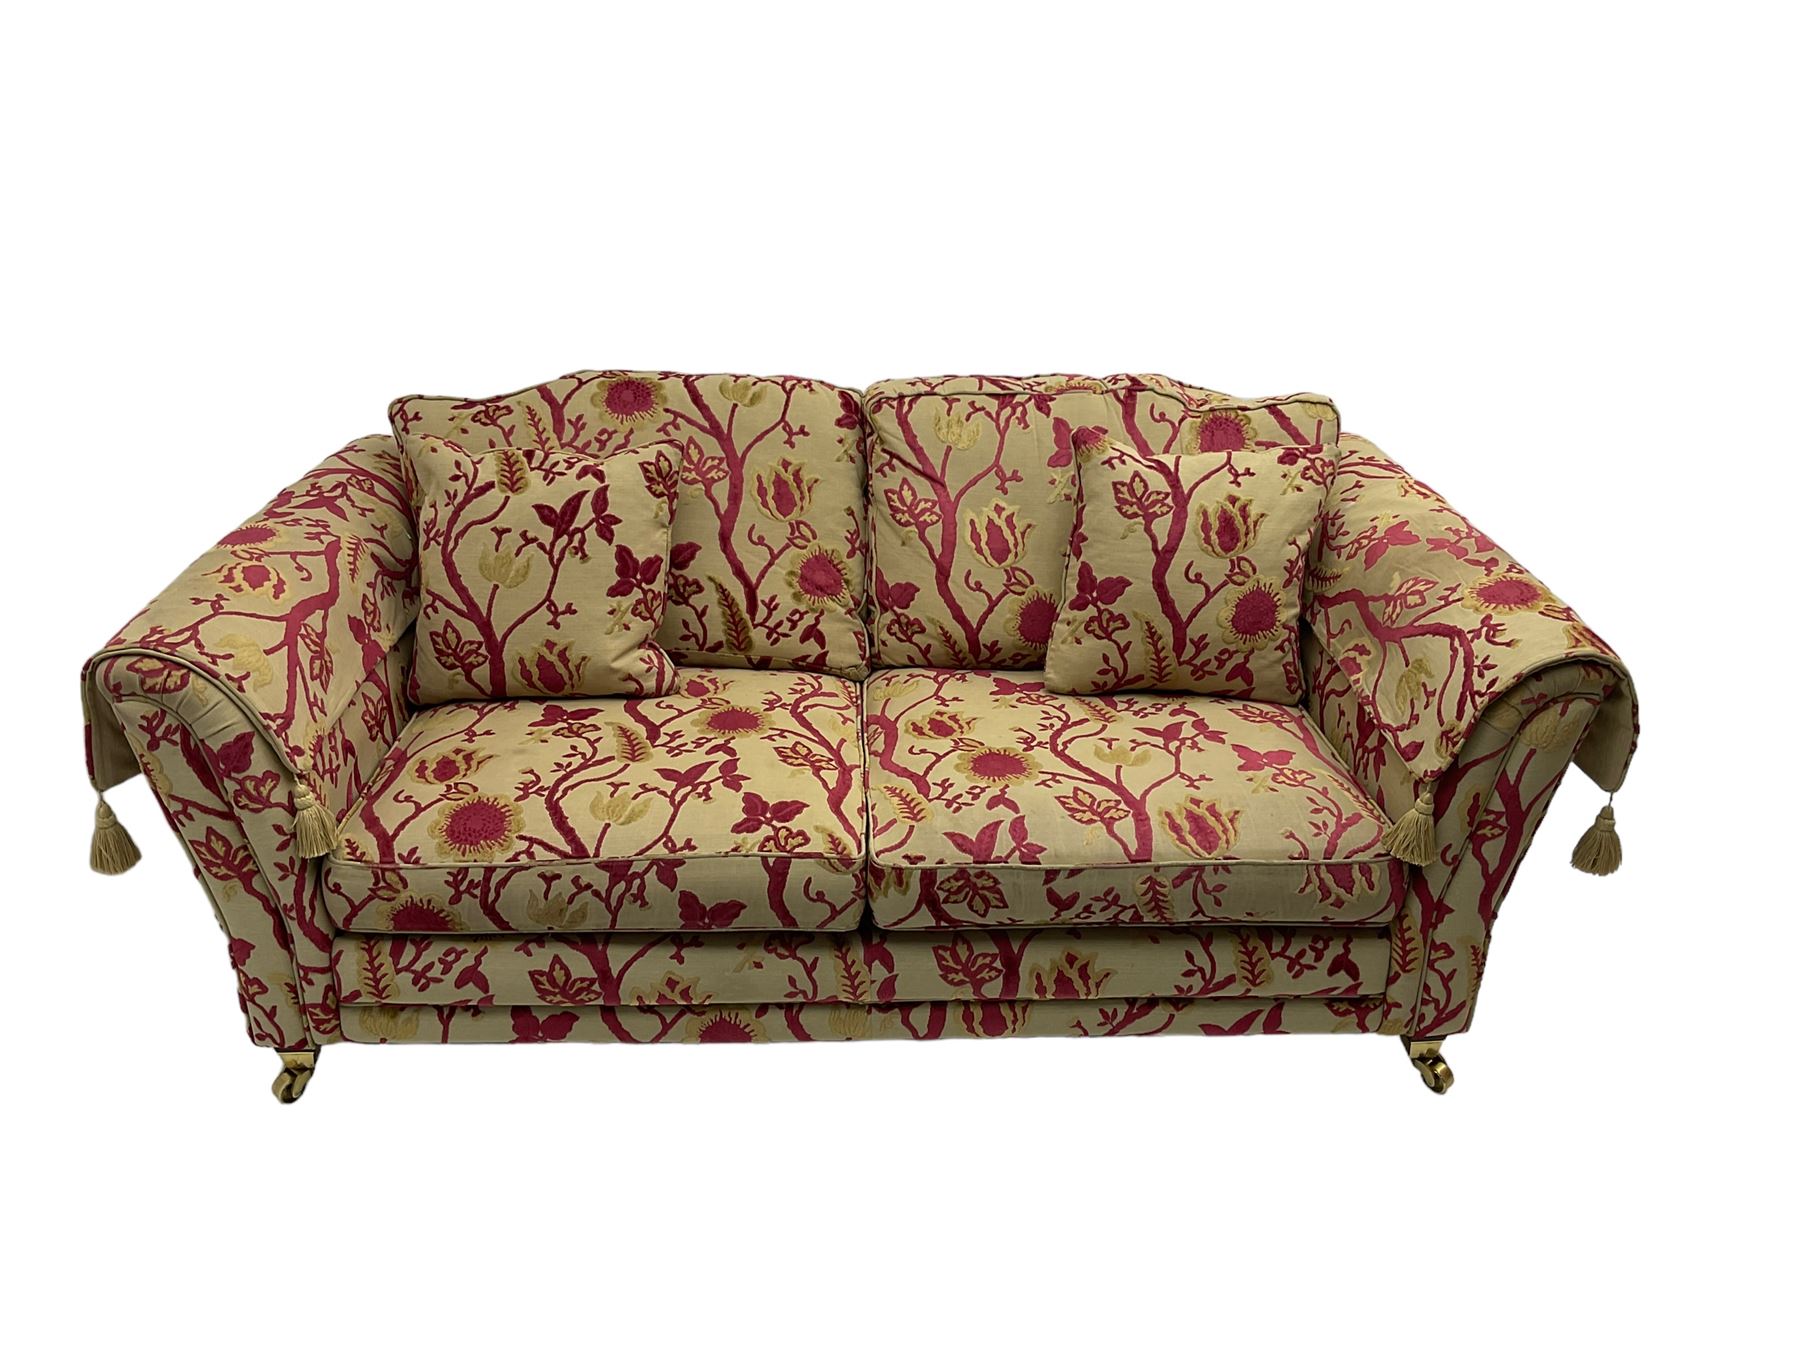 Three-piece lounge suite - large two-seat sofa upholstered in red and gold striped fabric (W185cm - Bild 5 aus 24